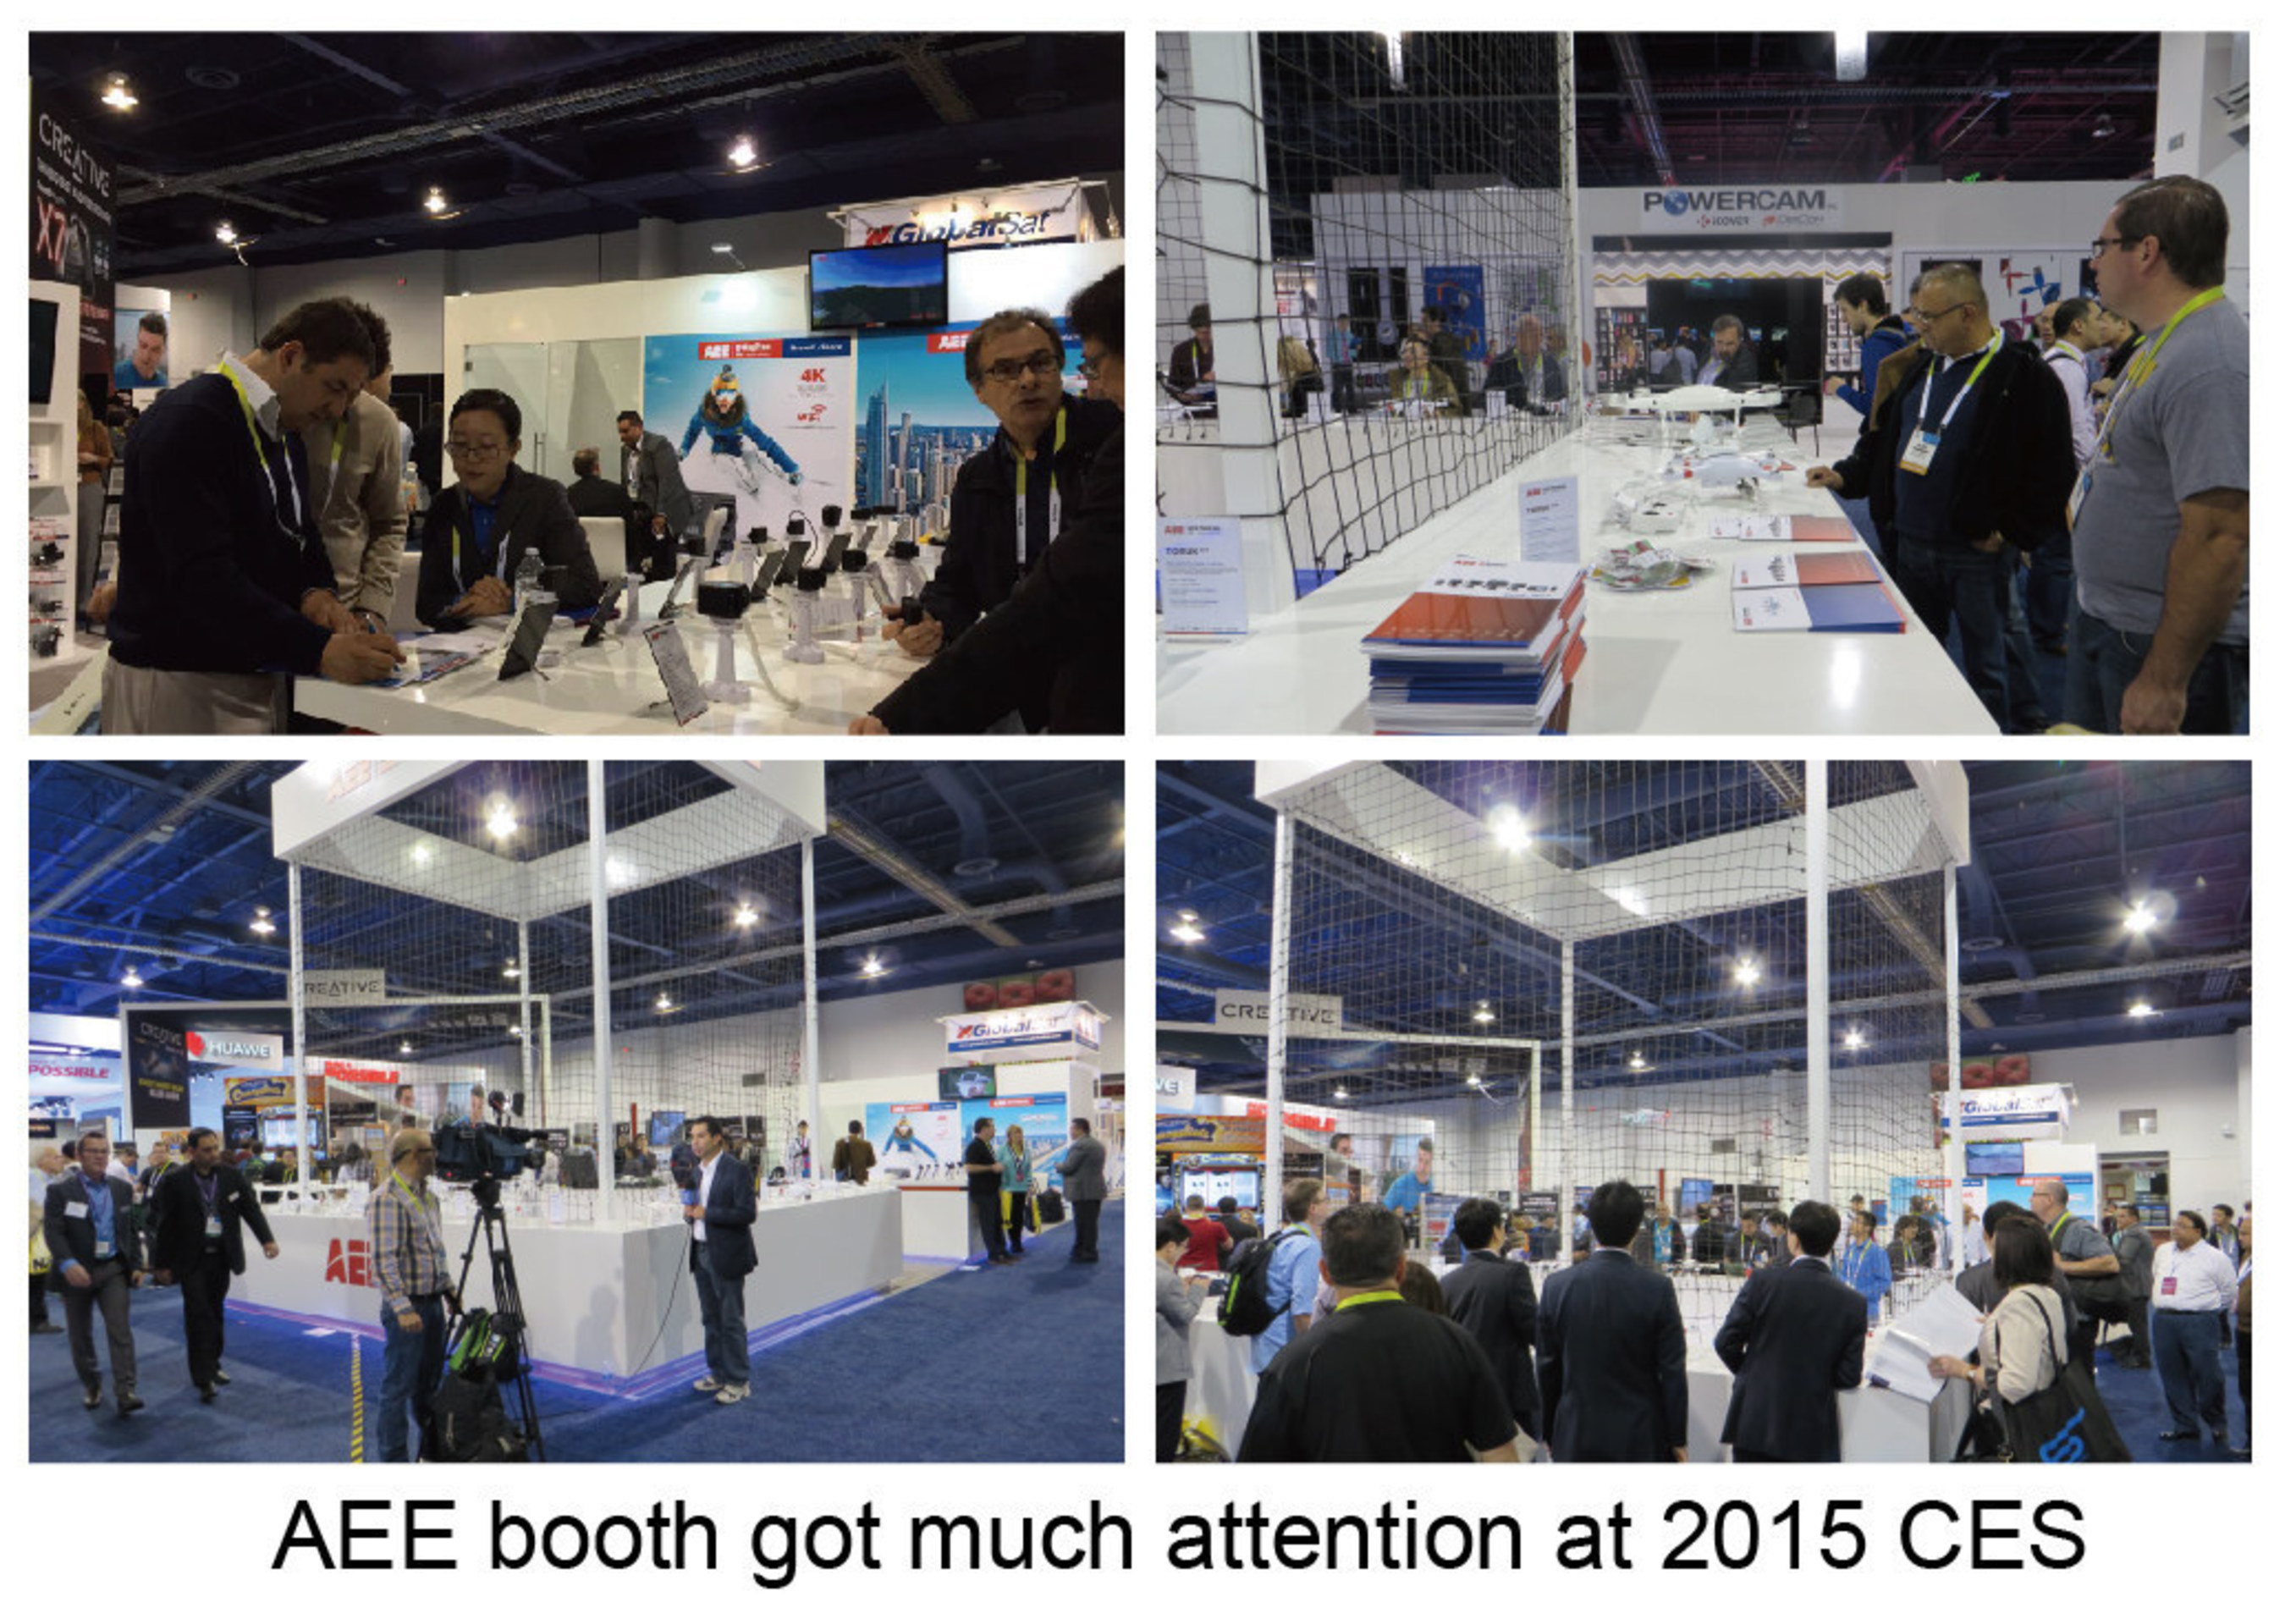 AEE booth gets much attention at 2015 CES